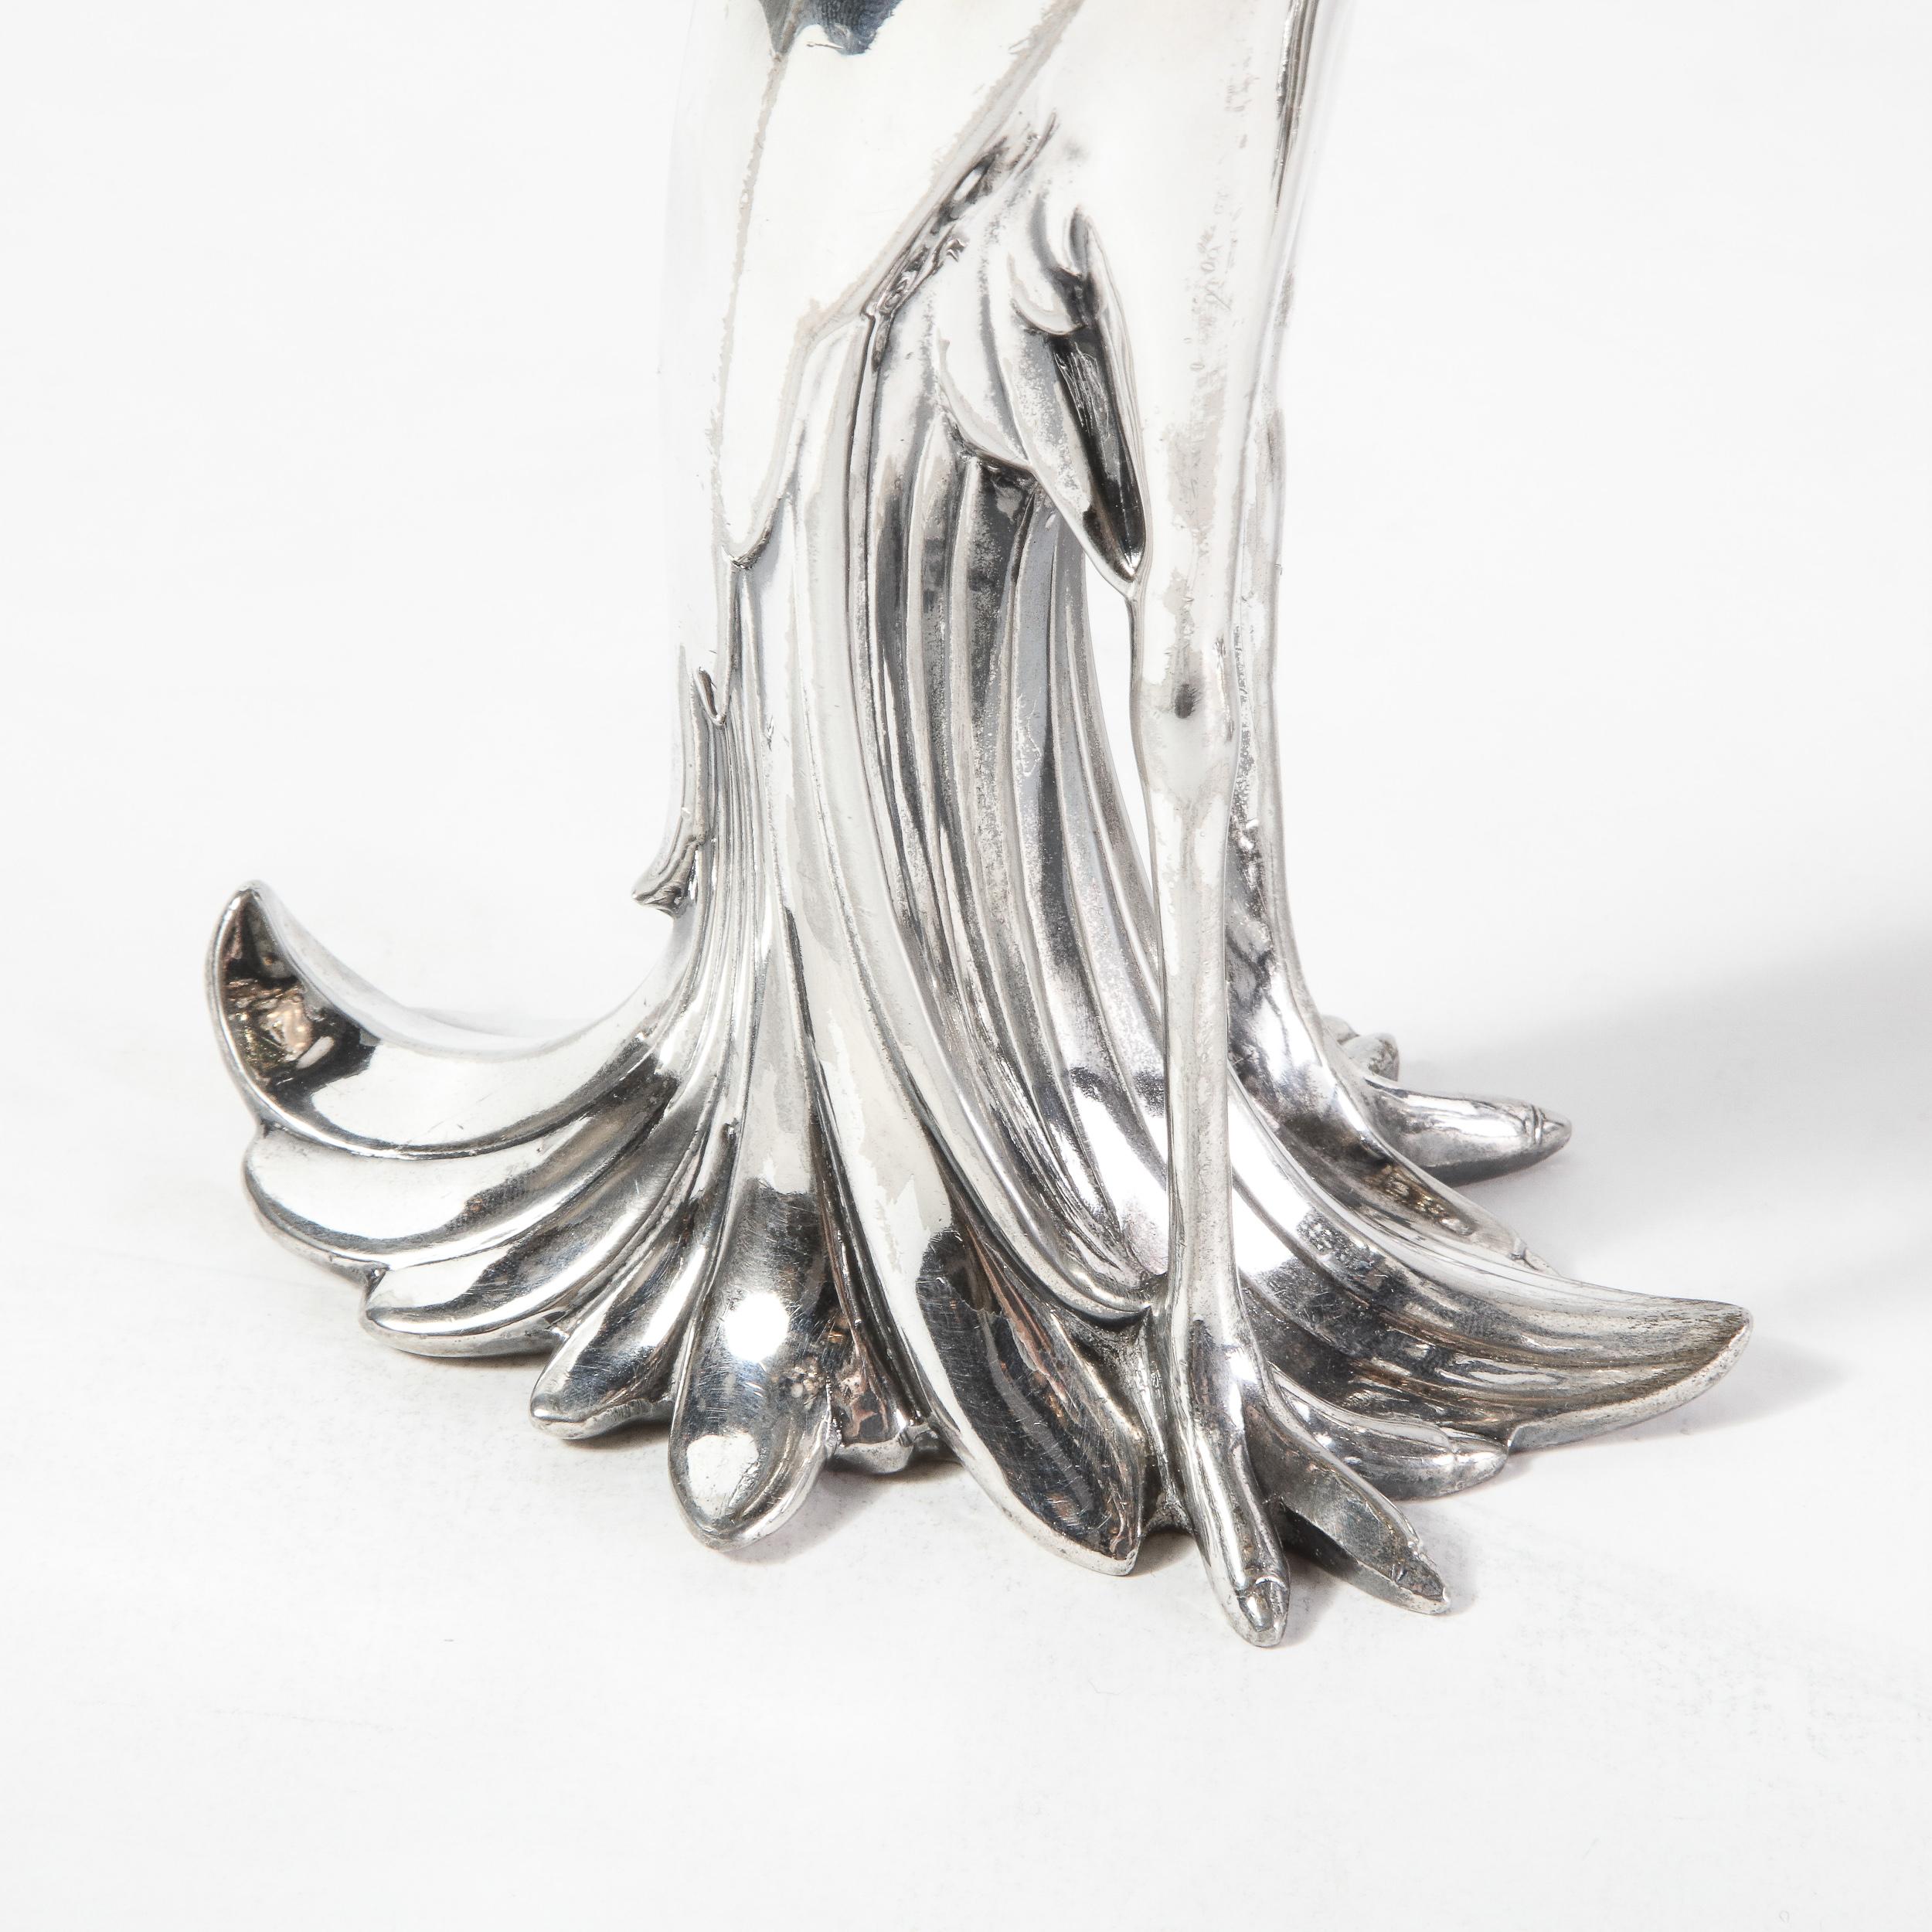 Silver Plate Pair of 1930s Art Deco Silverplated Stylized Peacock Sculptures by Weidlich Bros